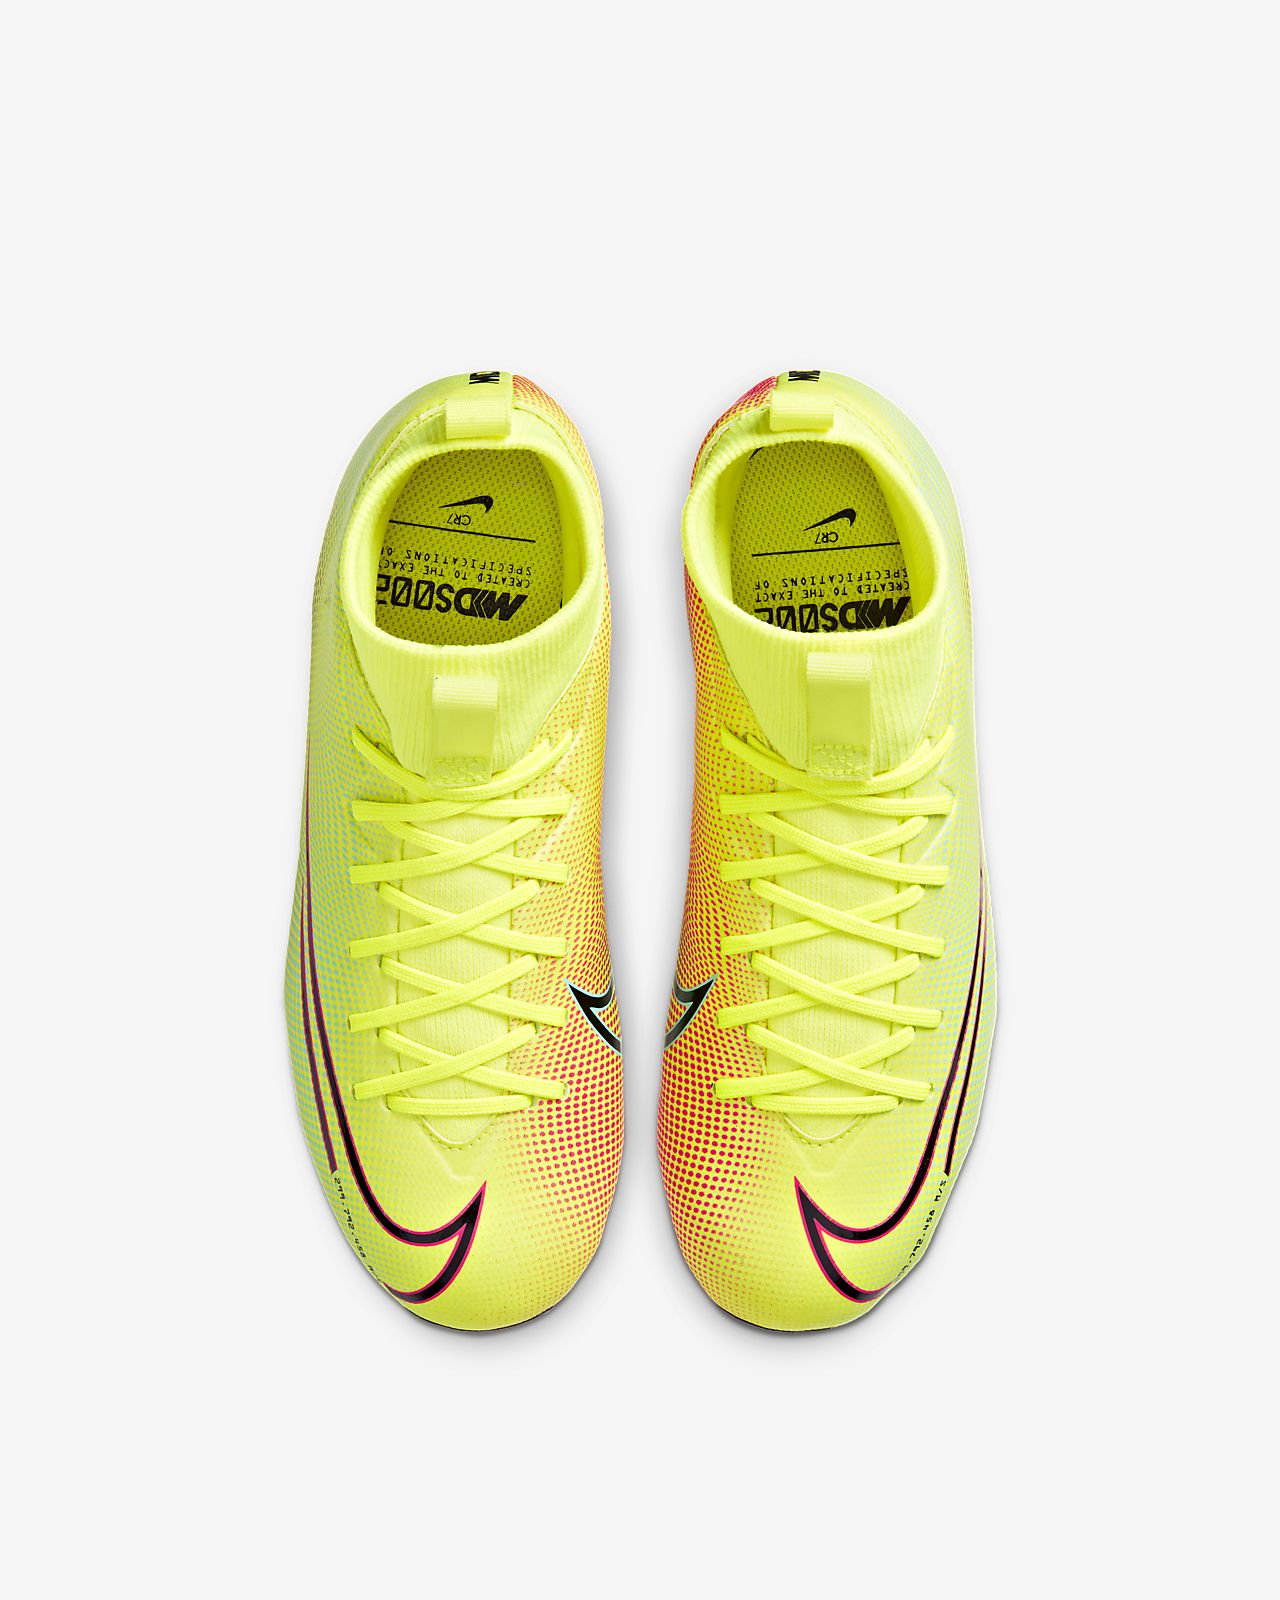 JR SUPERFLY 6 ACADEMY GS TF Nike 5297478 in.